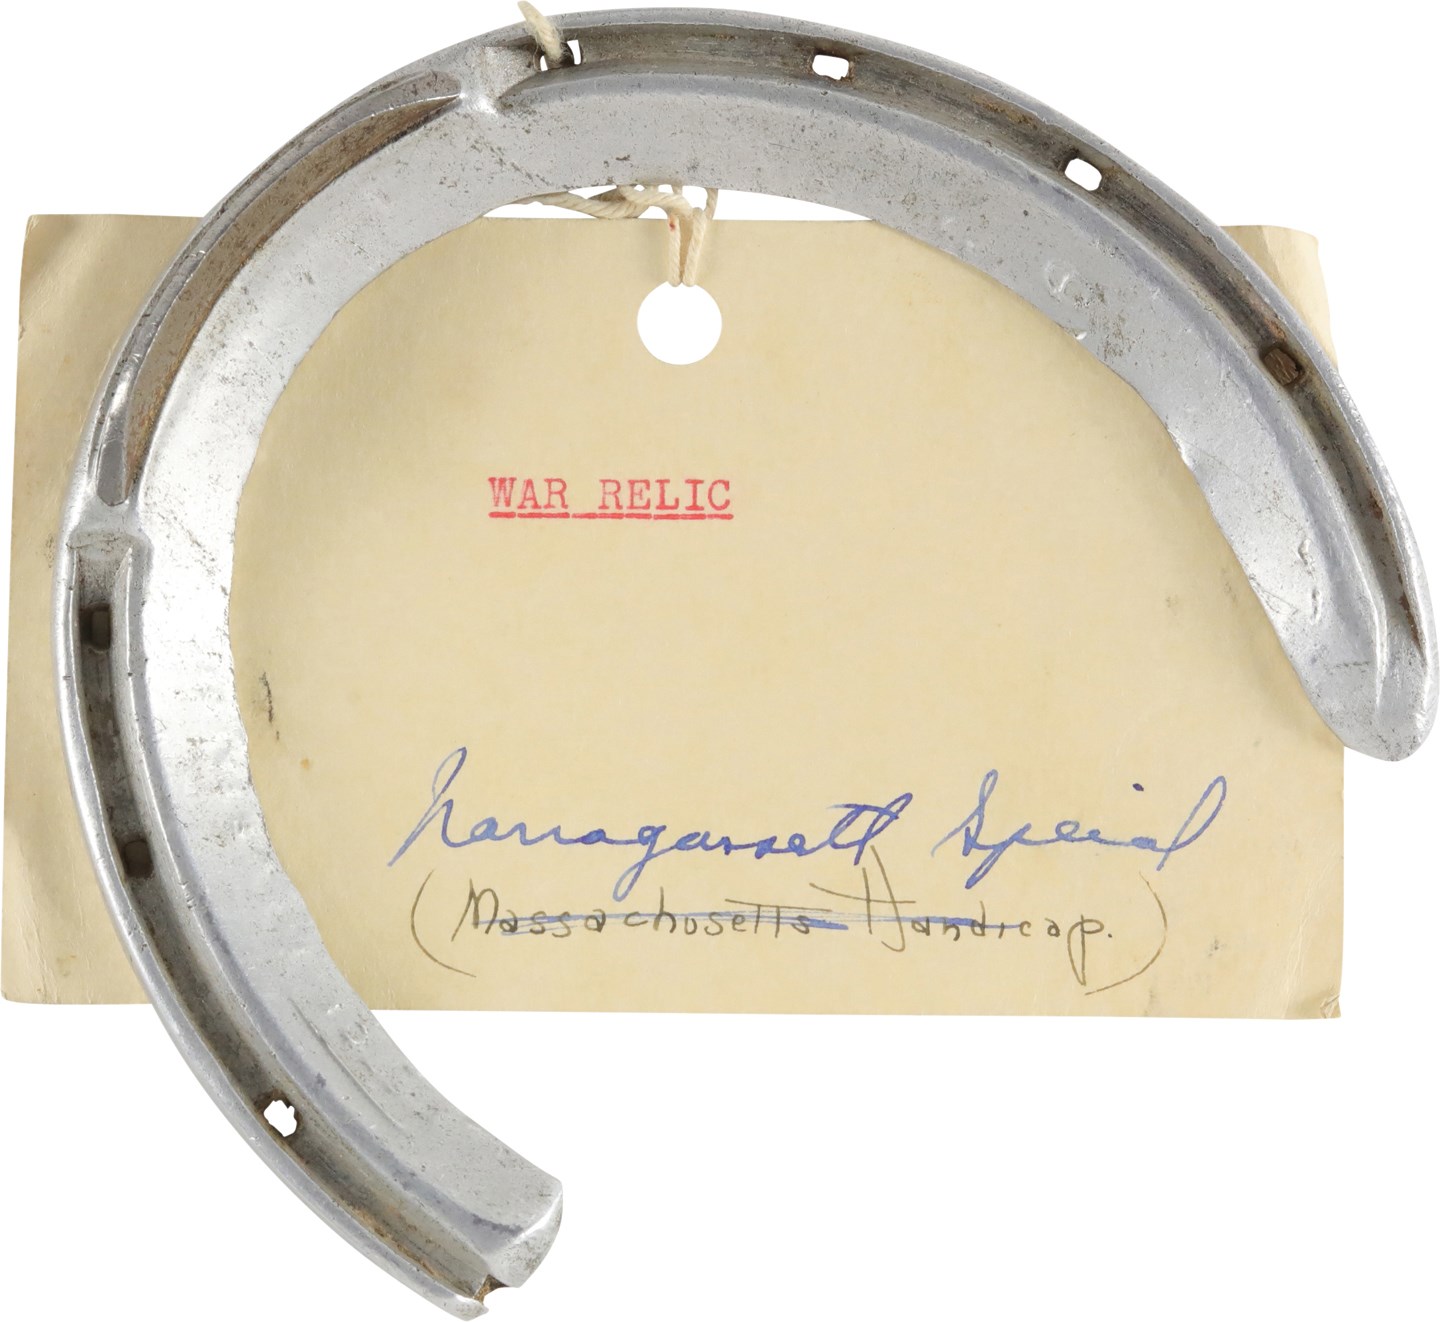 - 1941 "War Relic" Horseshoe Attributed to Narragansett Special Victory